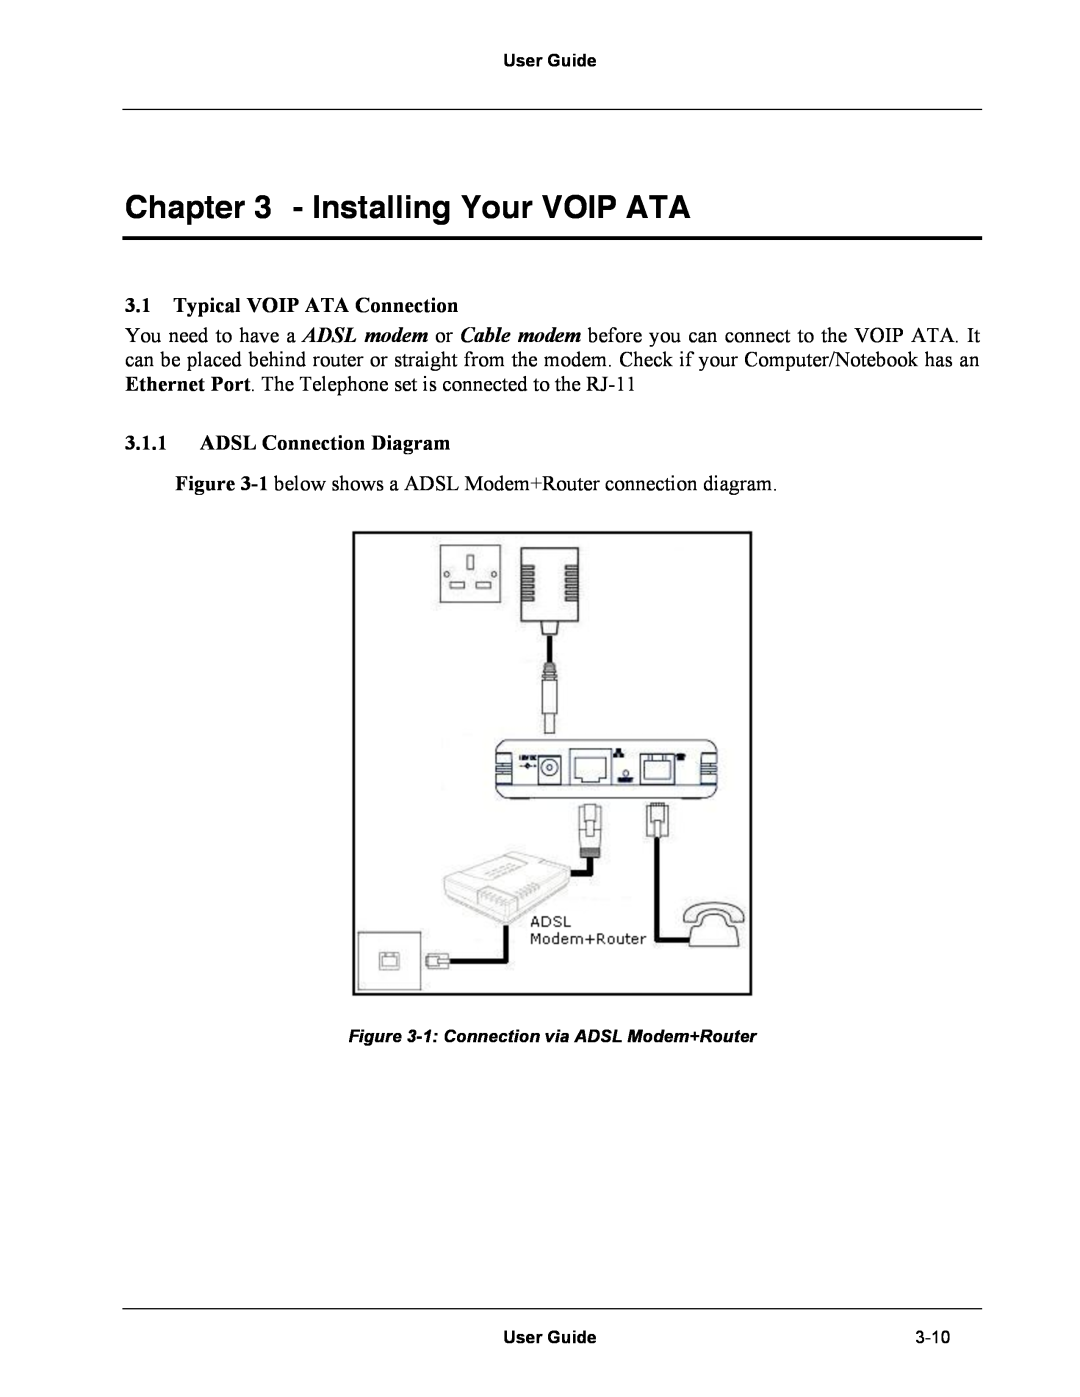 Netopia Network Adapater manual Installing Your VOIP ATA, Typical VOIP ATA Connection, ADSL Connection Diagram 